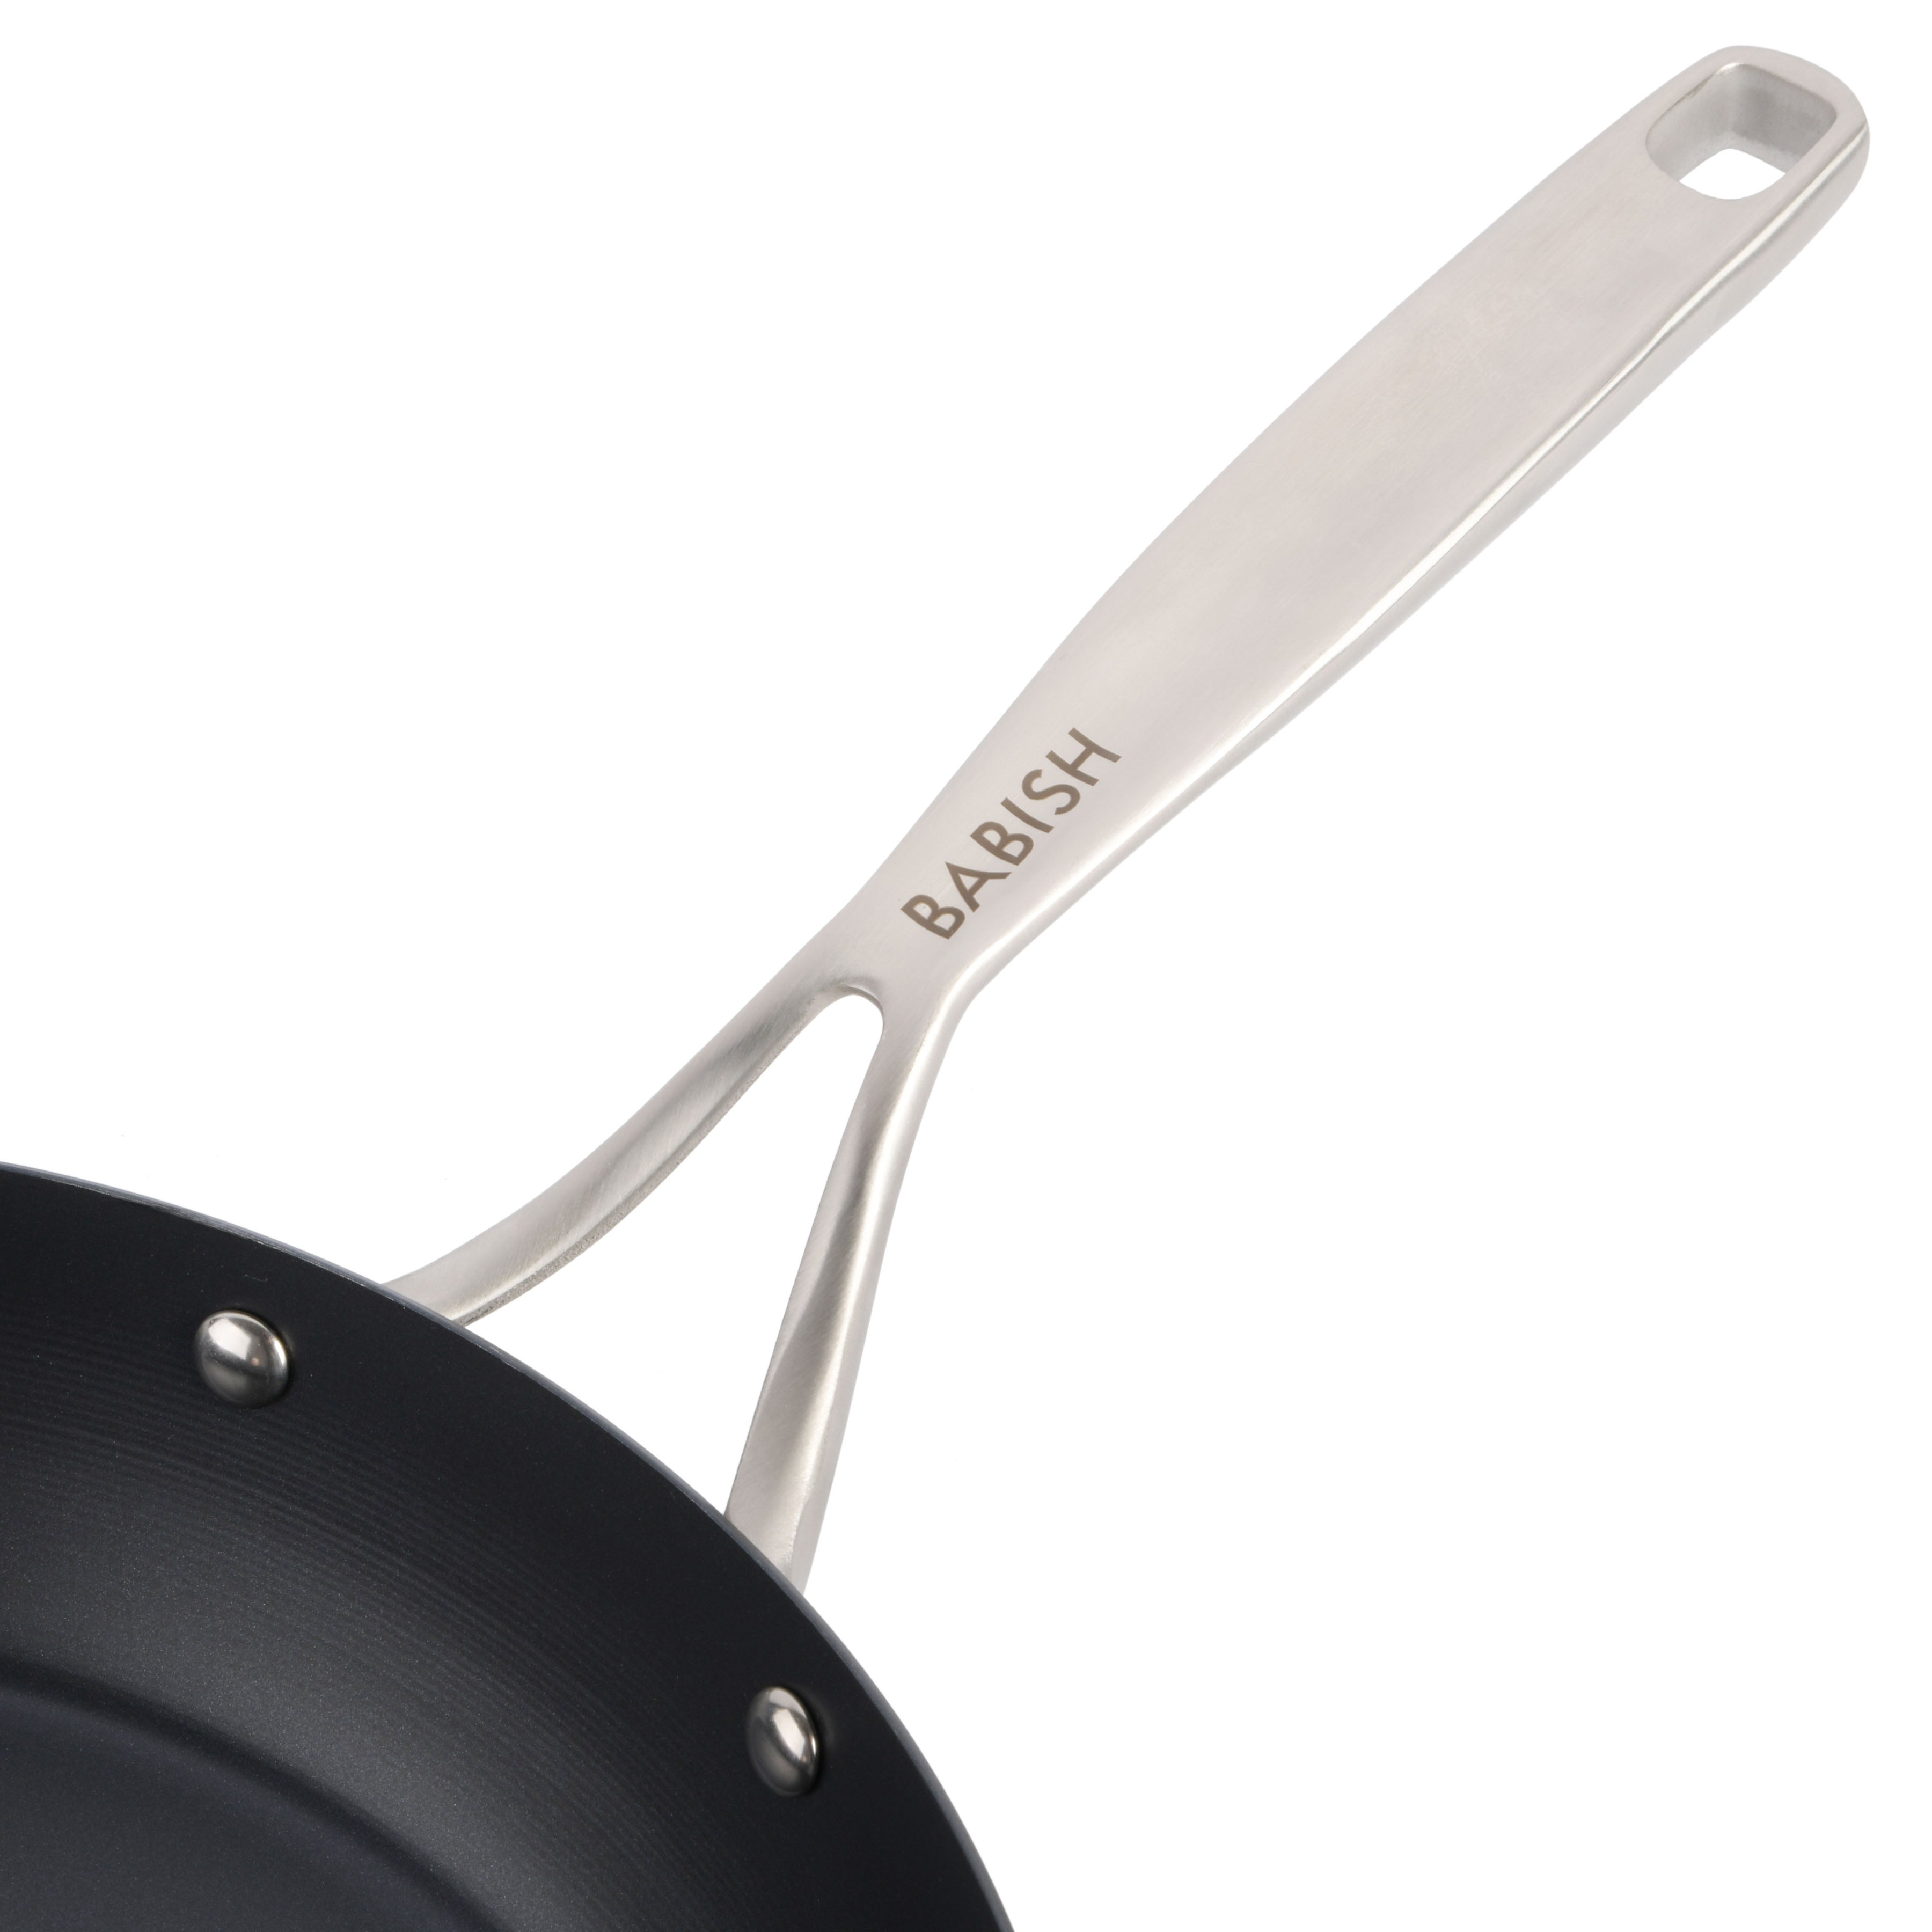 Babish 10 inch Stainless Steel Triply Professional Grade Fry Pan